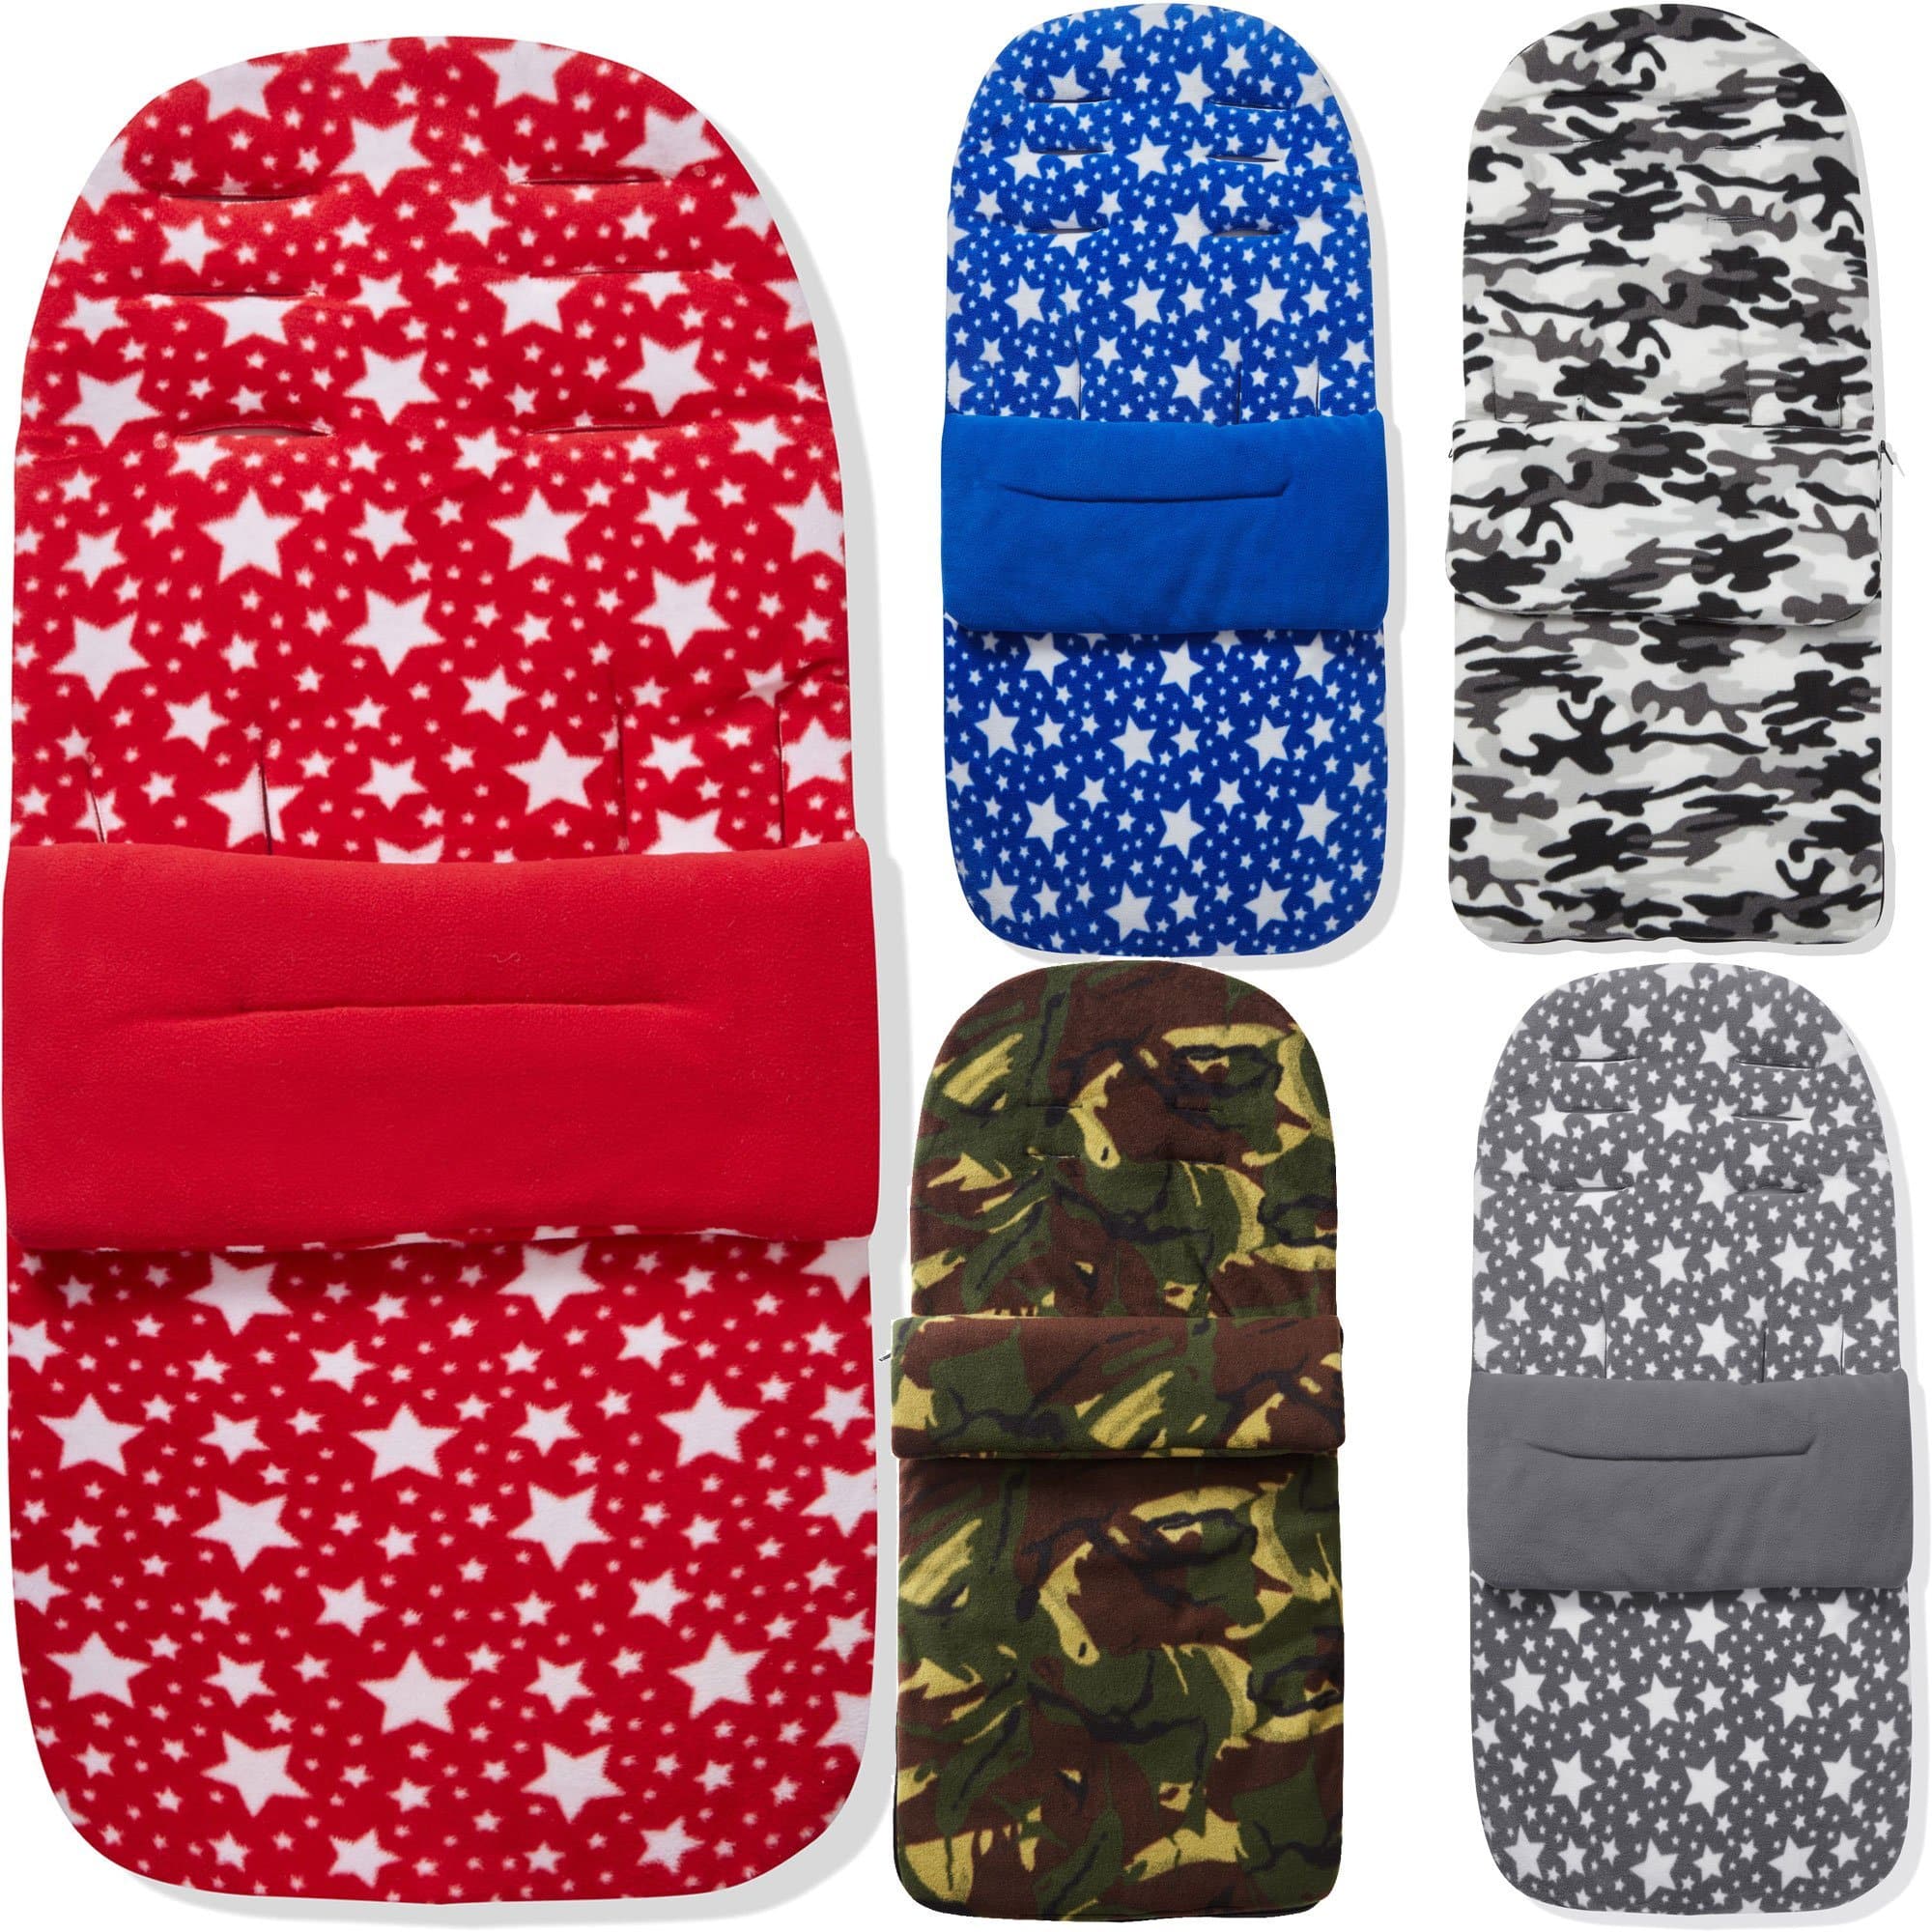 Fleece Footmuff / Cosy Toes Compatible with Out 'n' About -  | For Your Little One